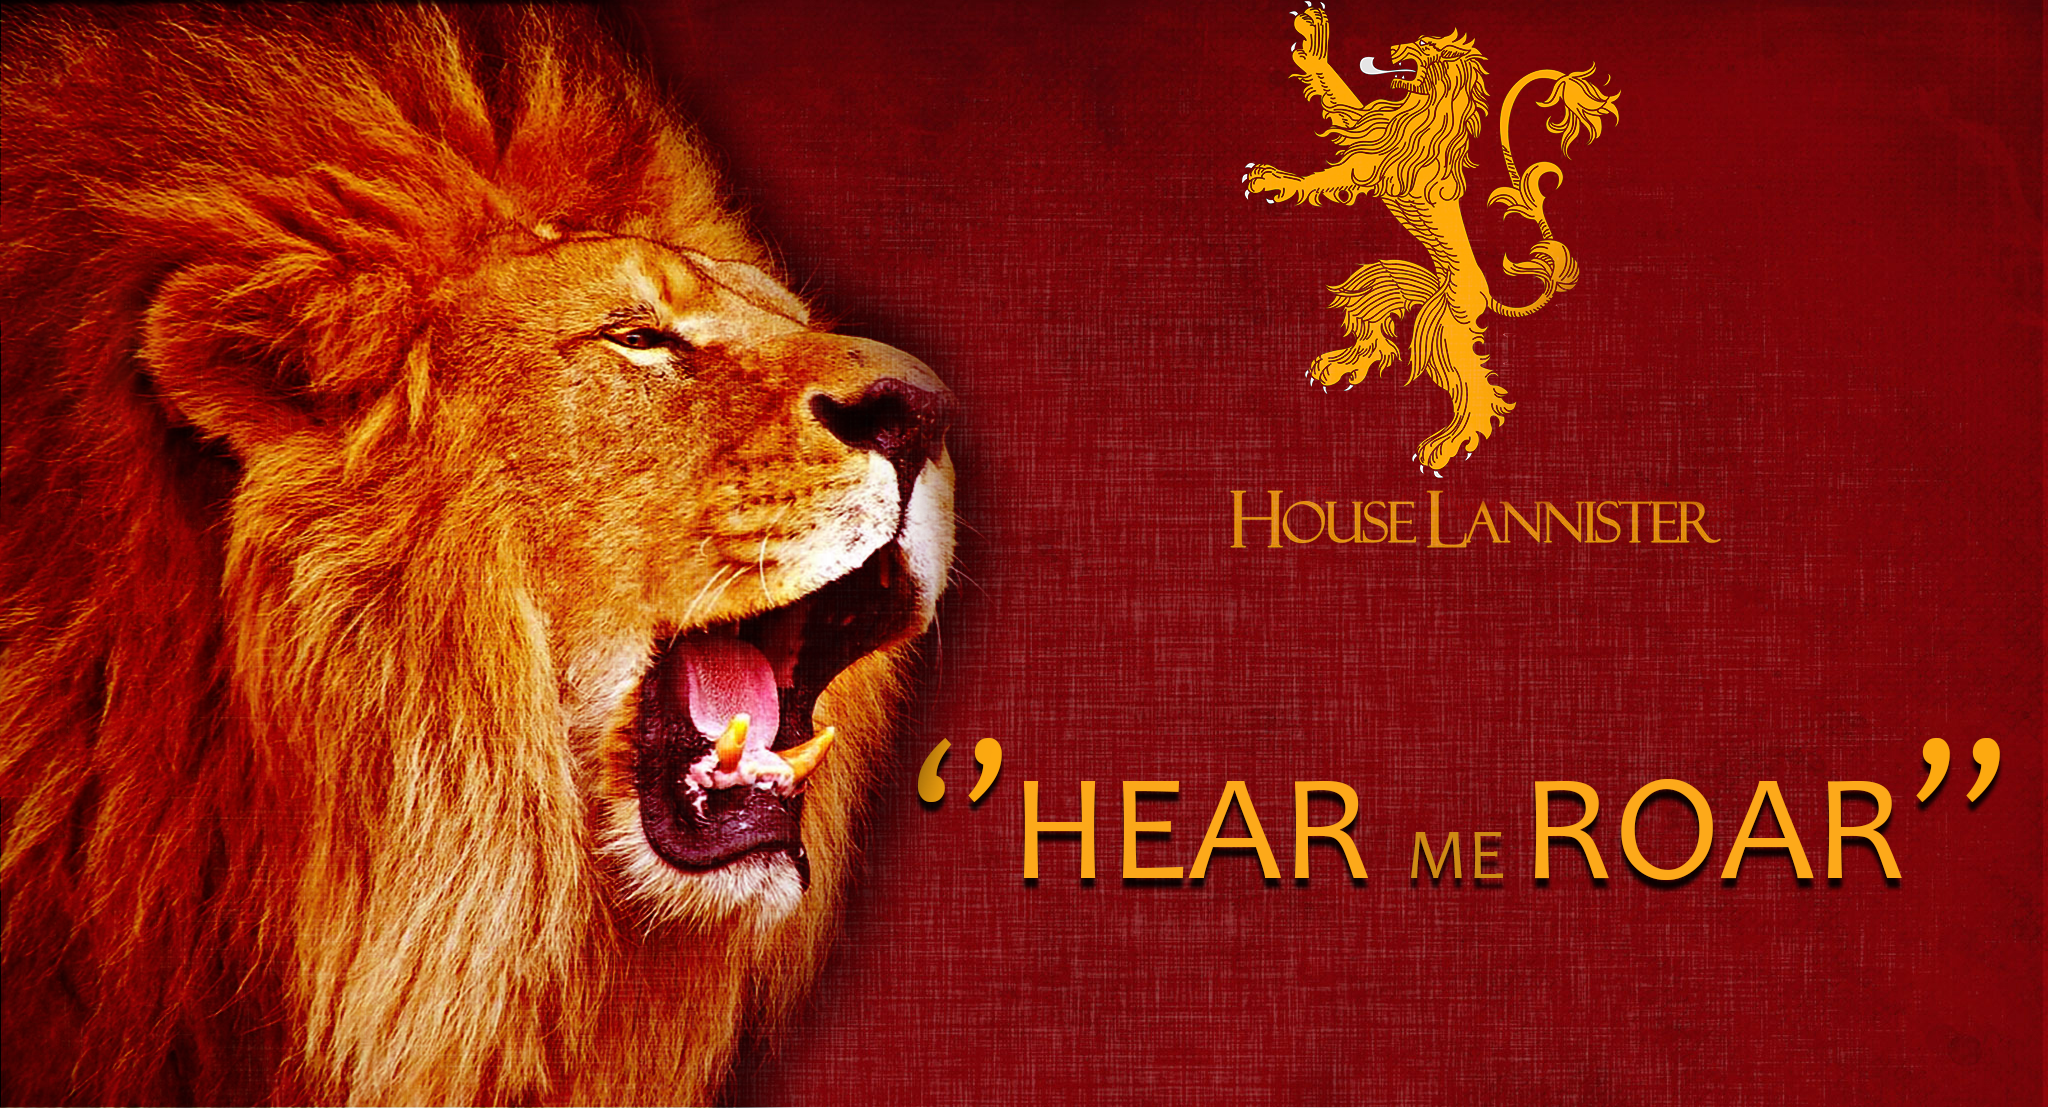 Game Thrones House Lannister